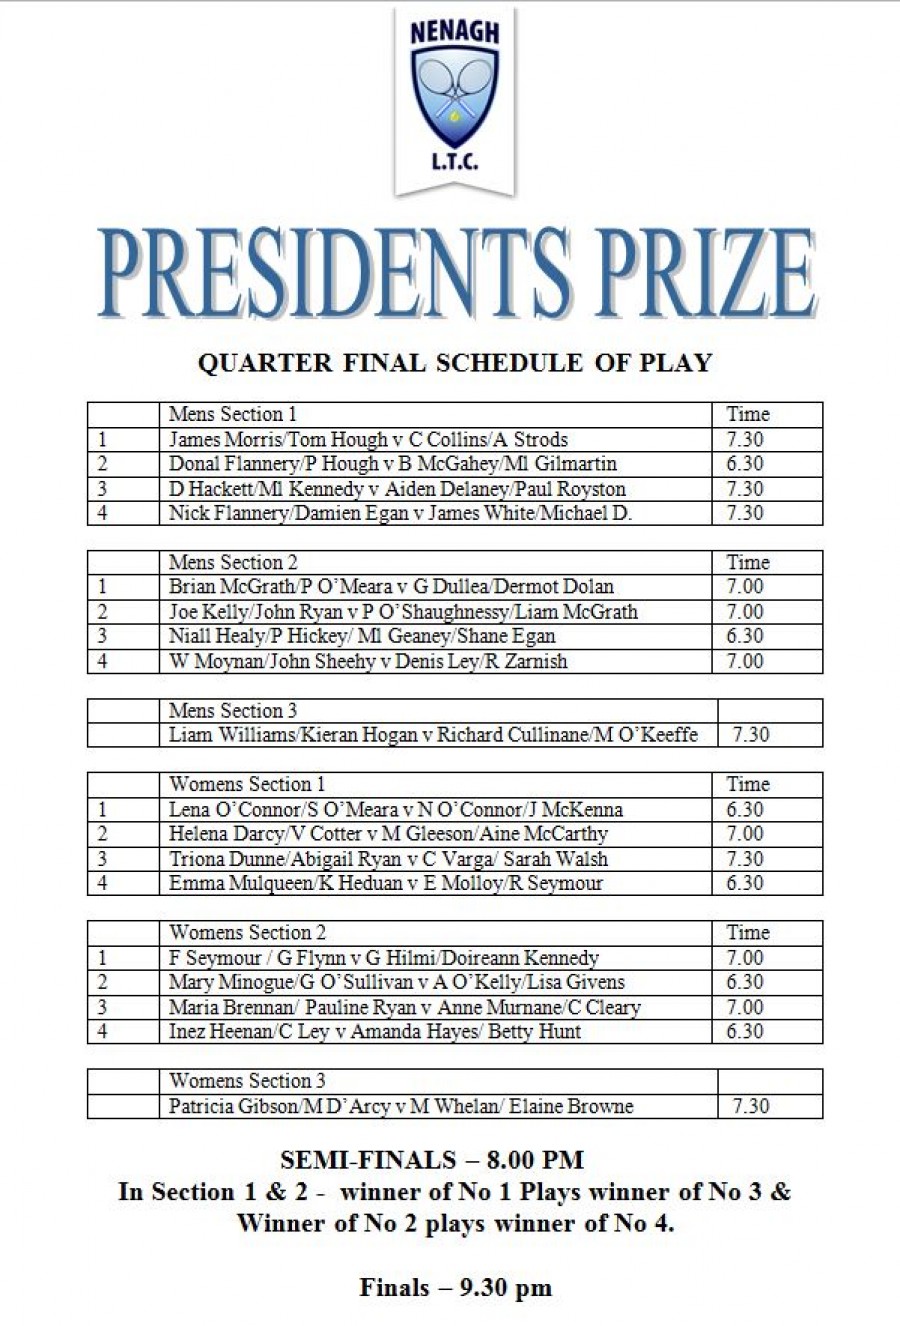 Presidents Prize – Friday Schedule of Play